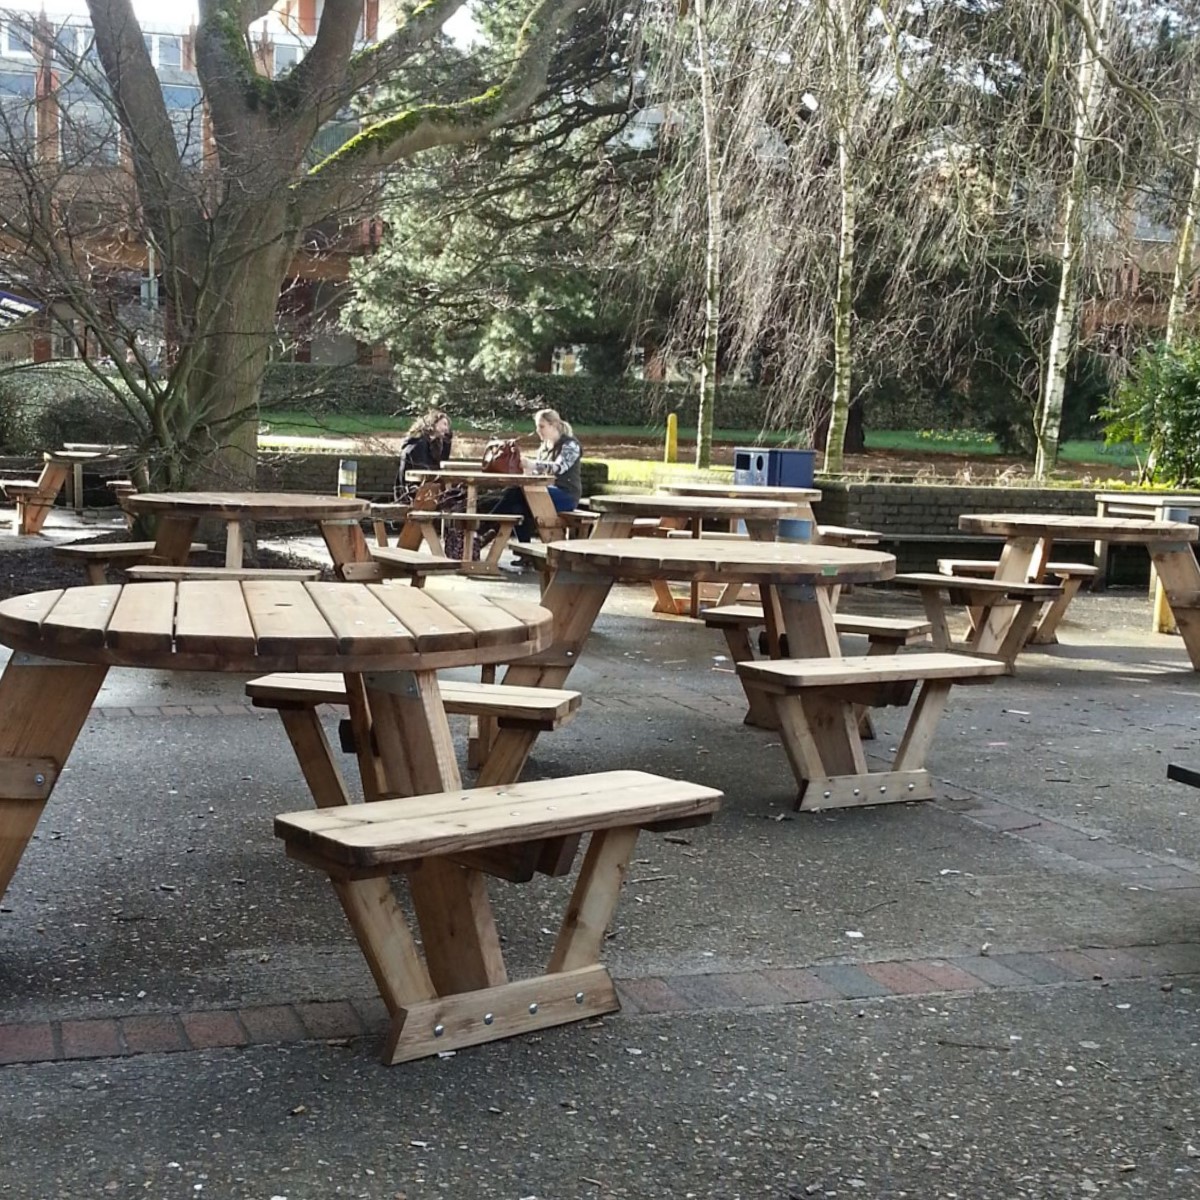 A patio area at Reading University with 8 circular wooden 6-seater picnic tables on and trees in the background